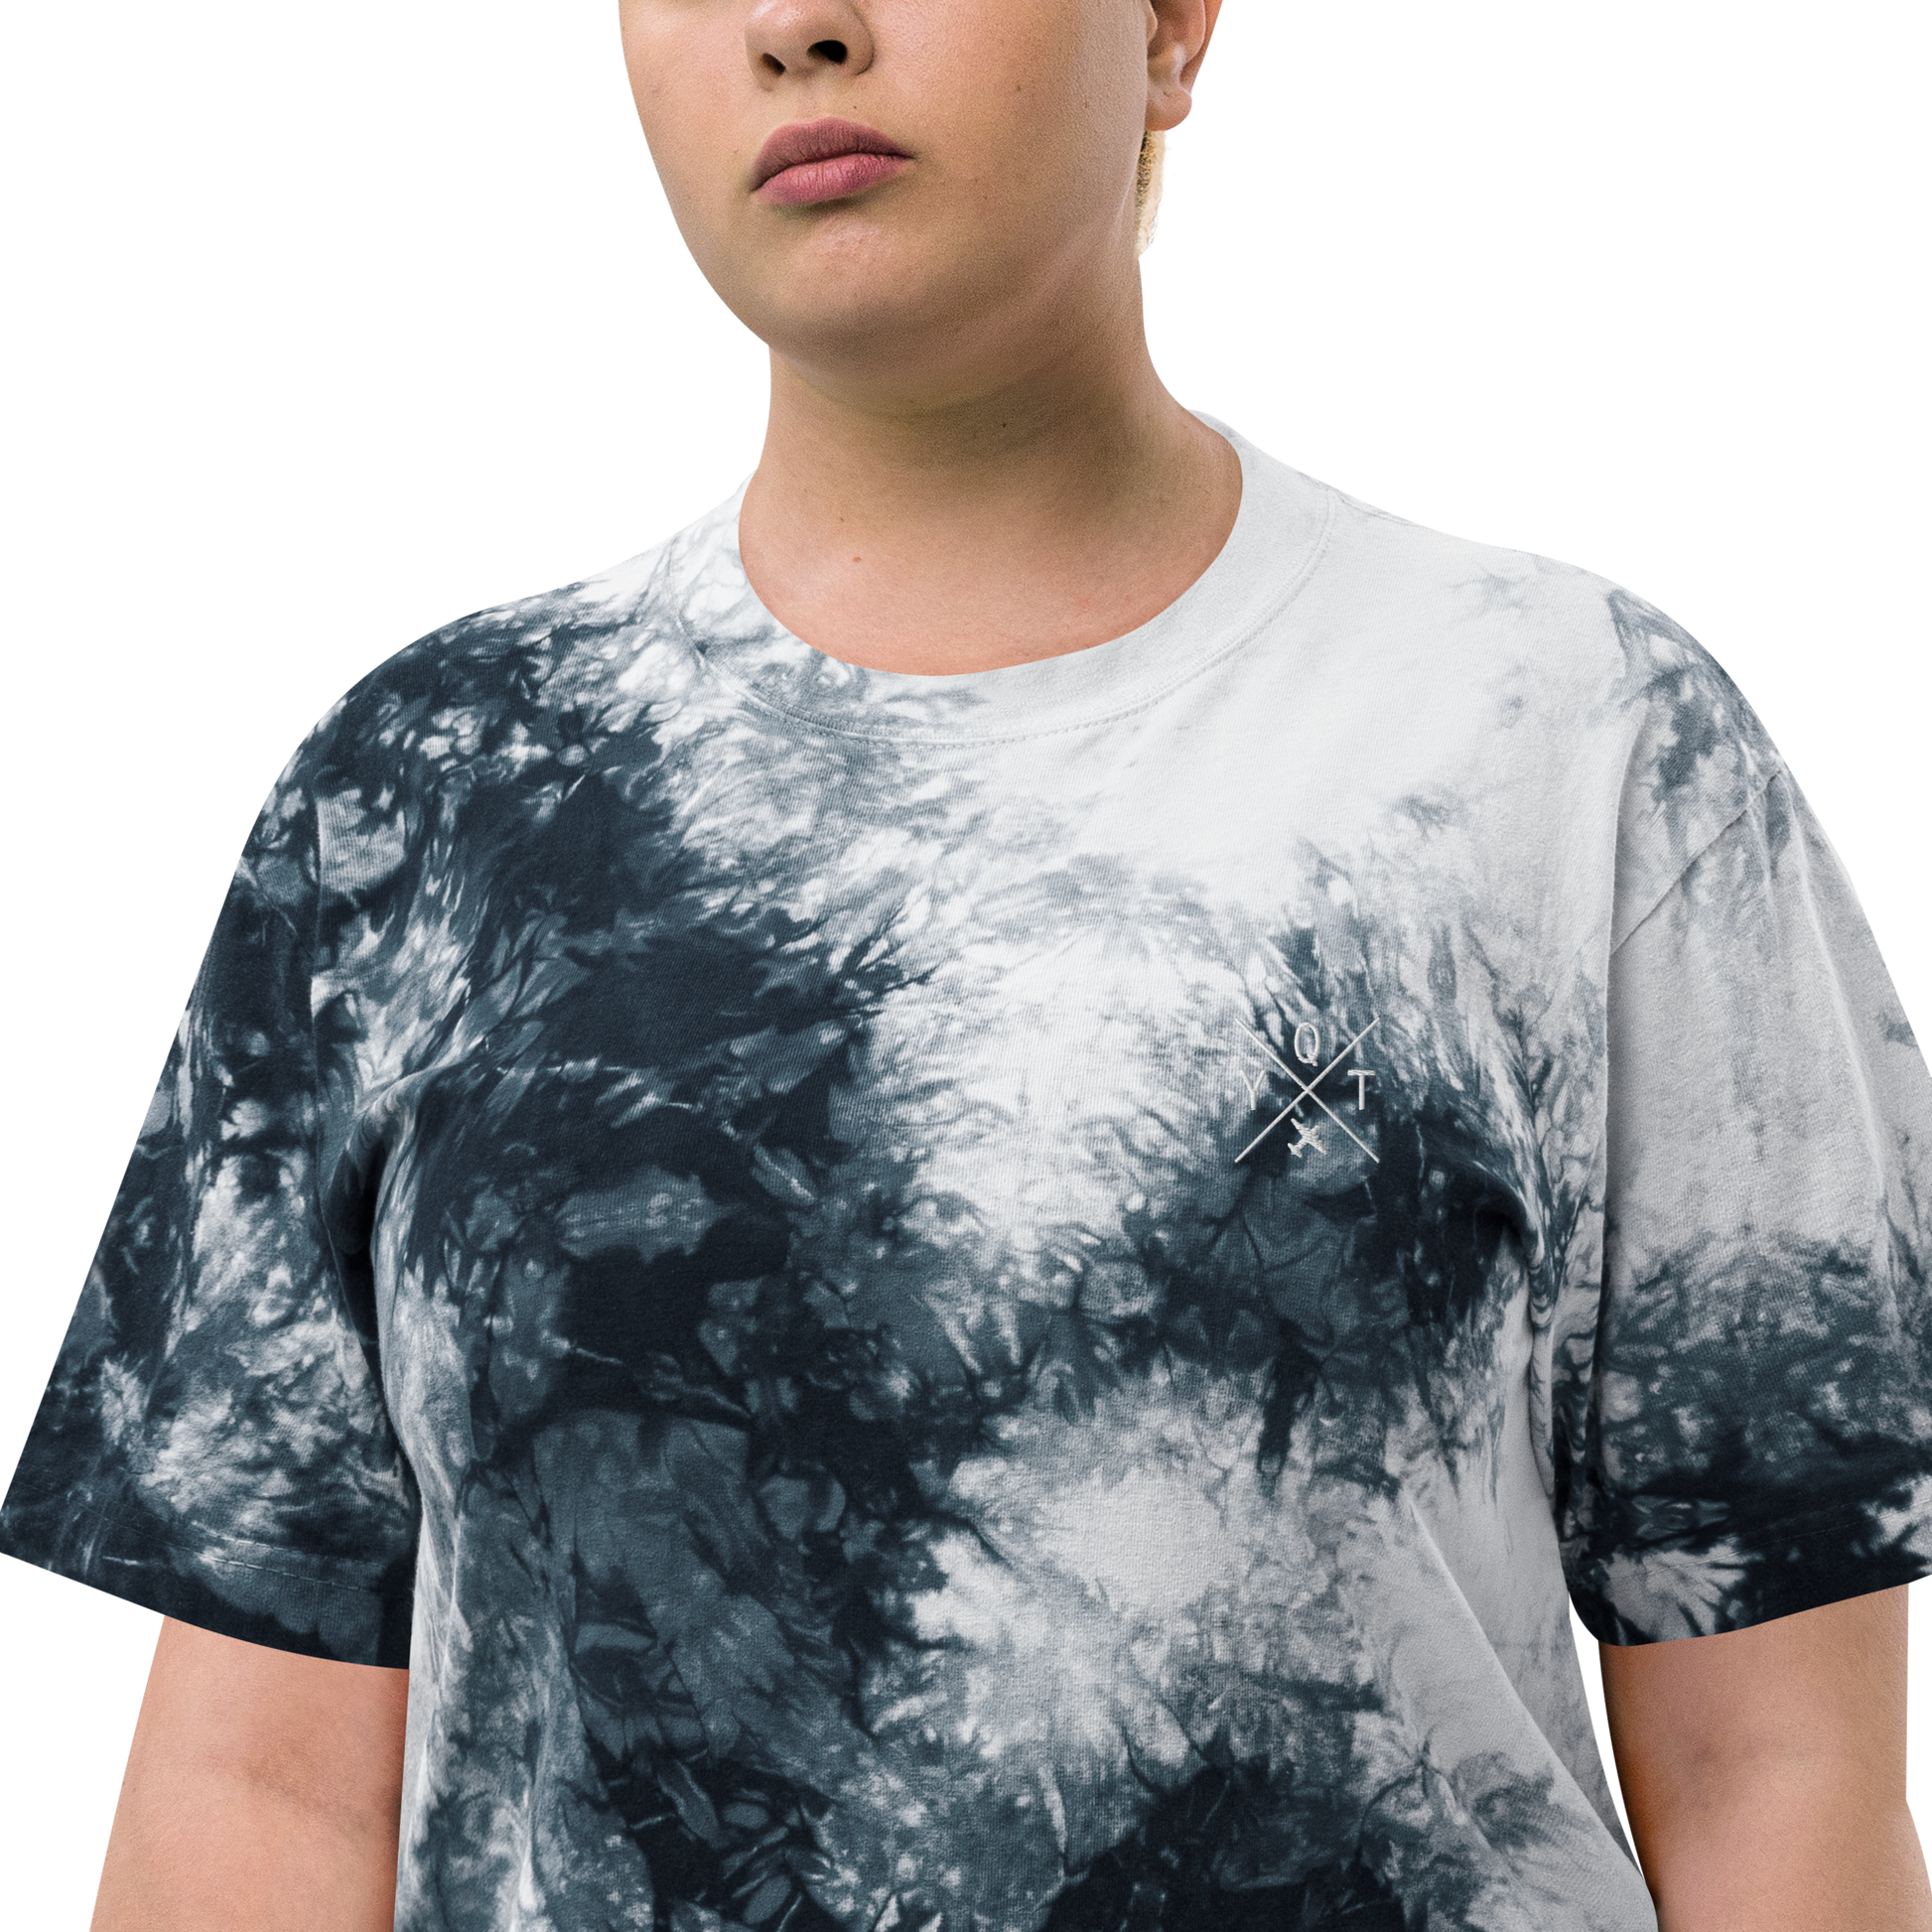 YHM Designs - YQT Thunder Bay Oversized Tie-Dye T-Shirt - Crossed-X Design with Airport Code and Vintage Propliner - White Embroidery - Image 18